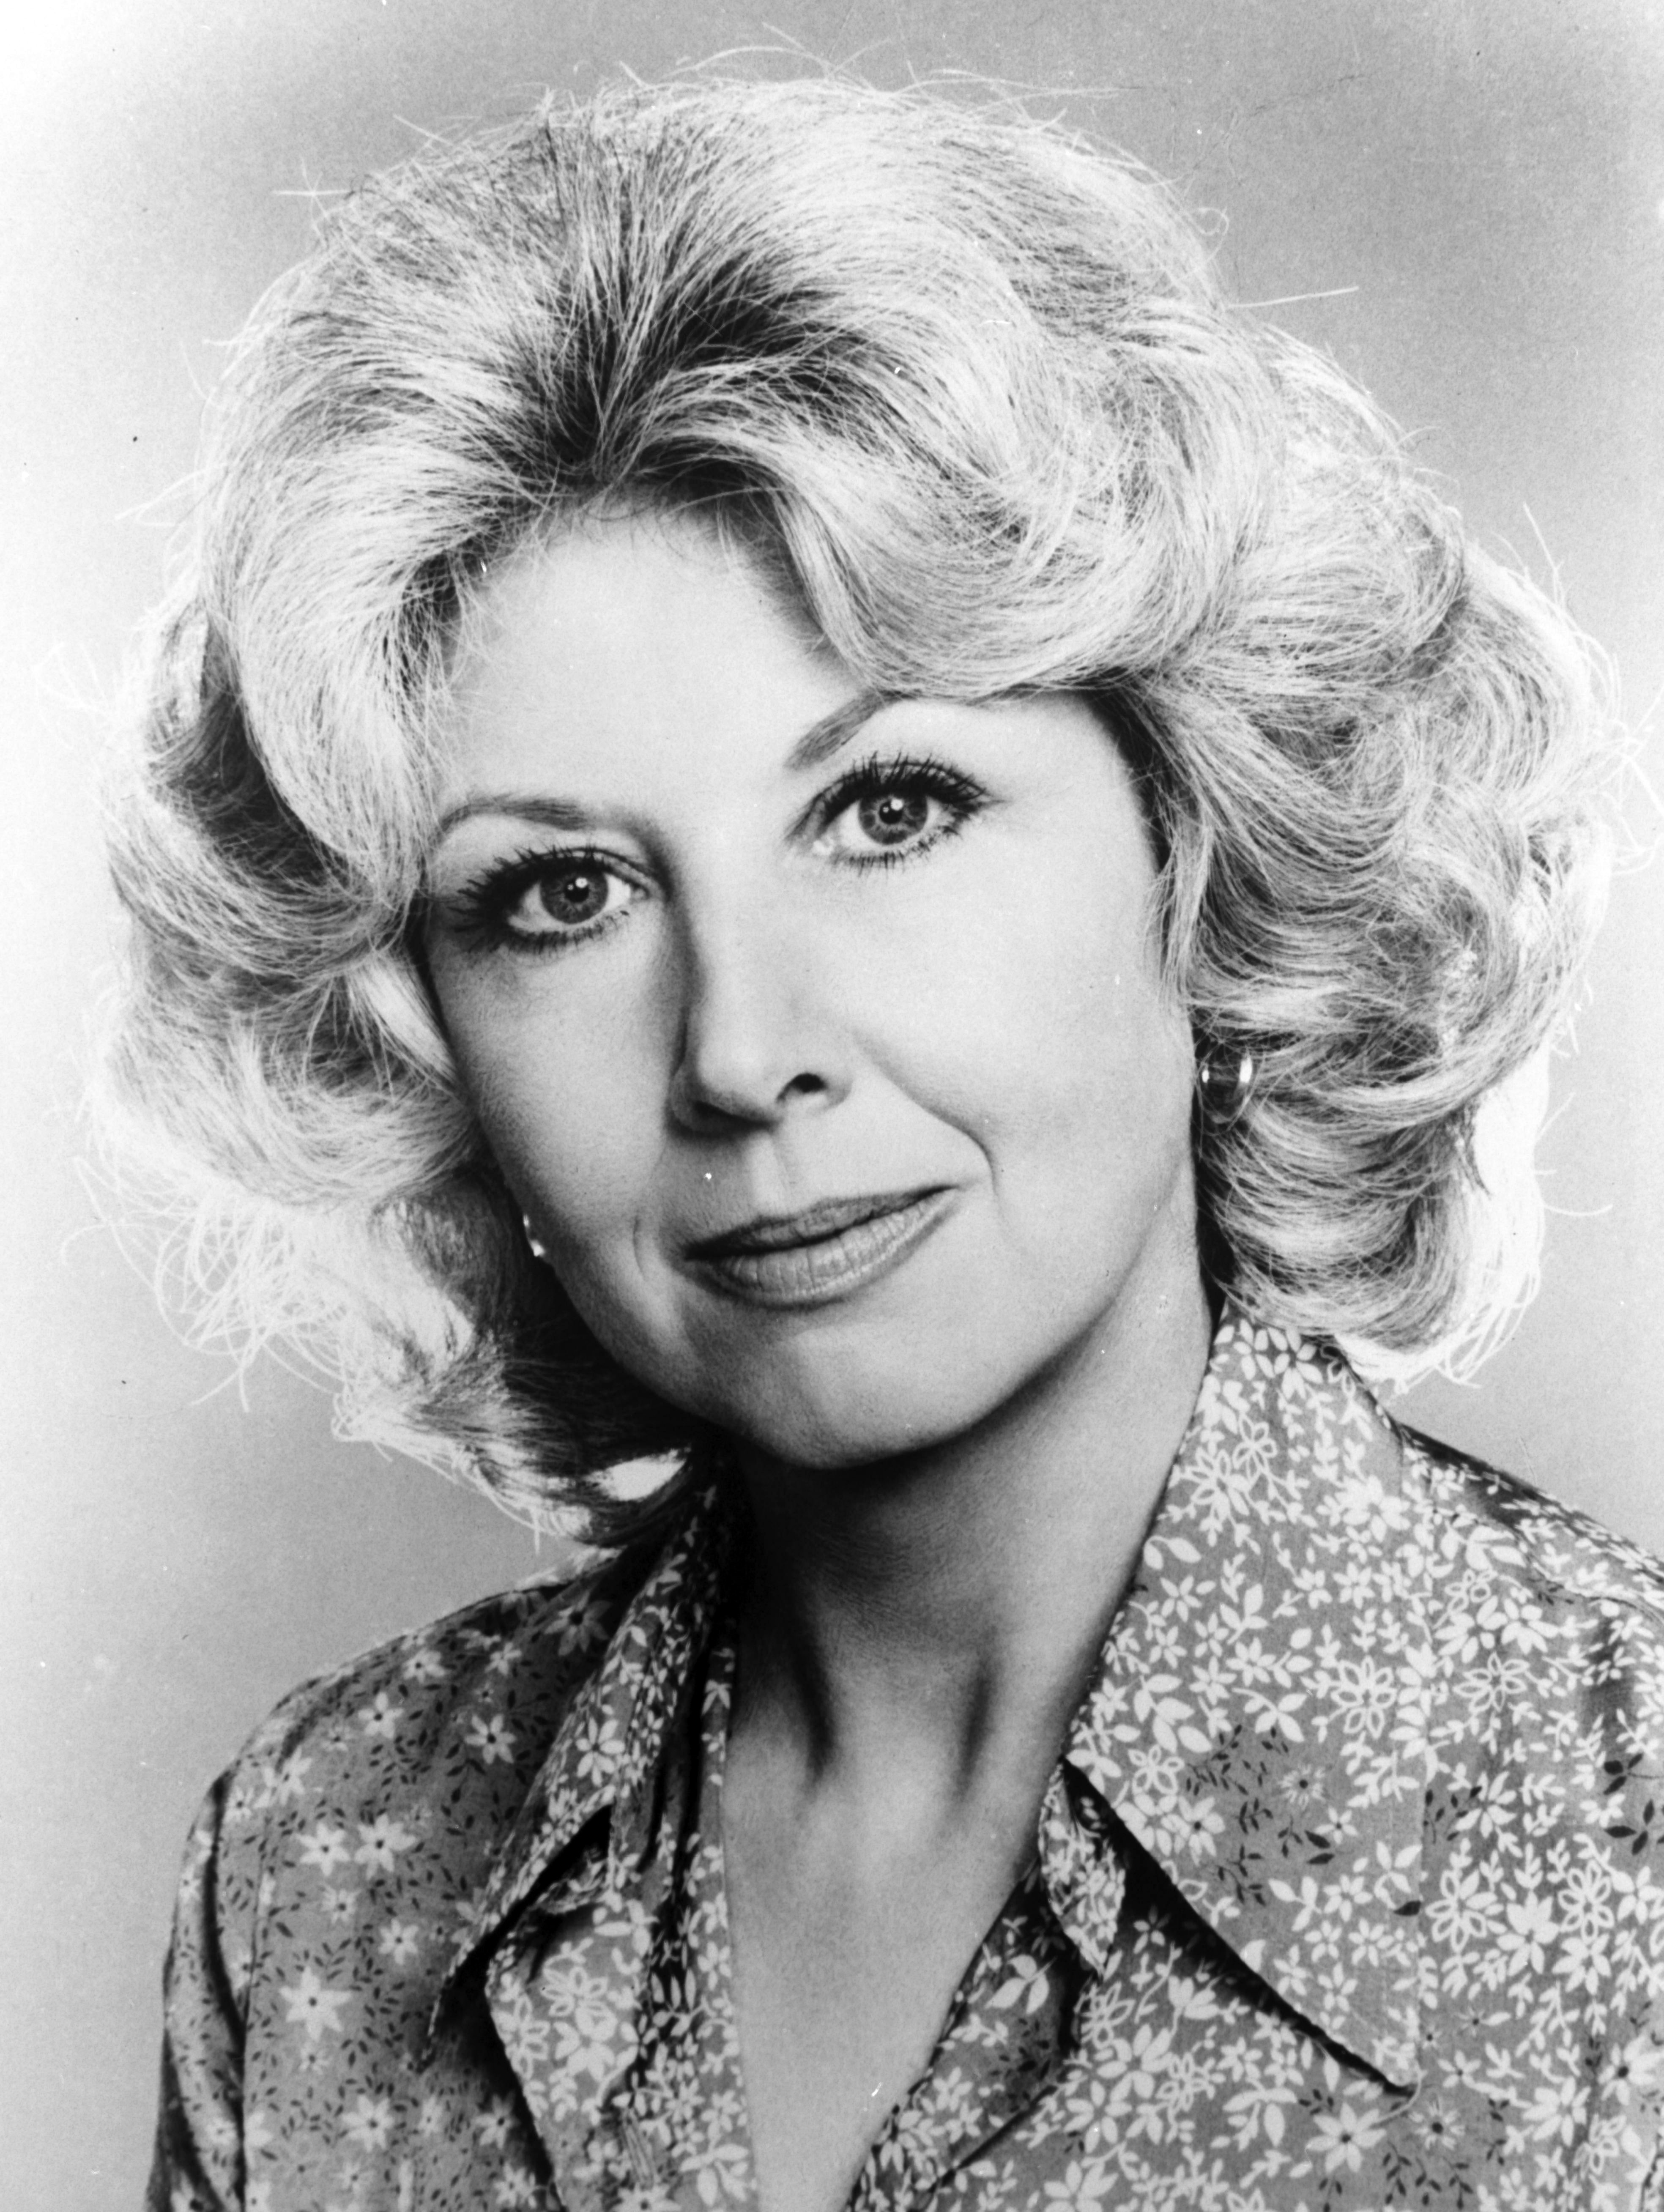 Michael Learned takes a portrait in the 1970s. | Photo: Getty Images